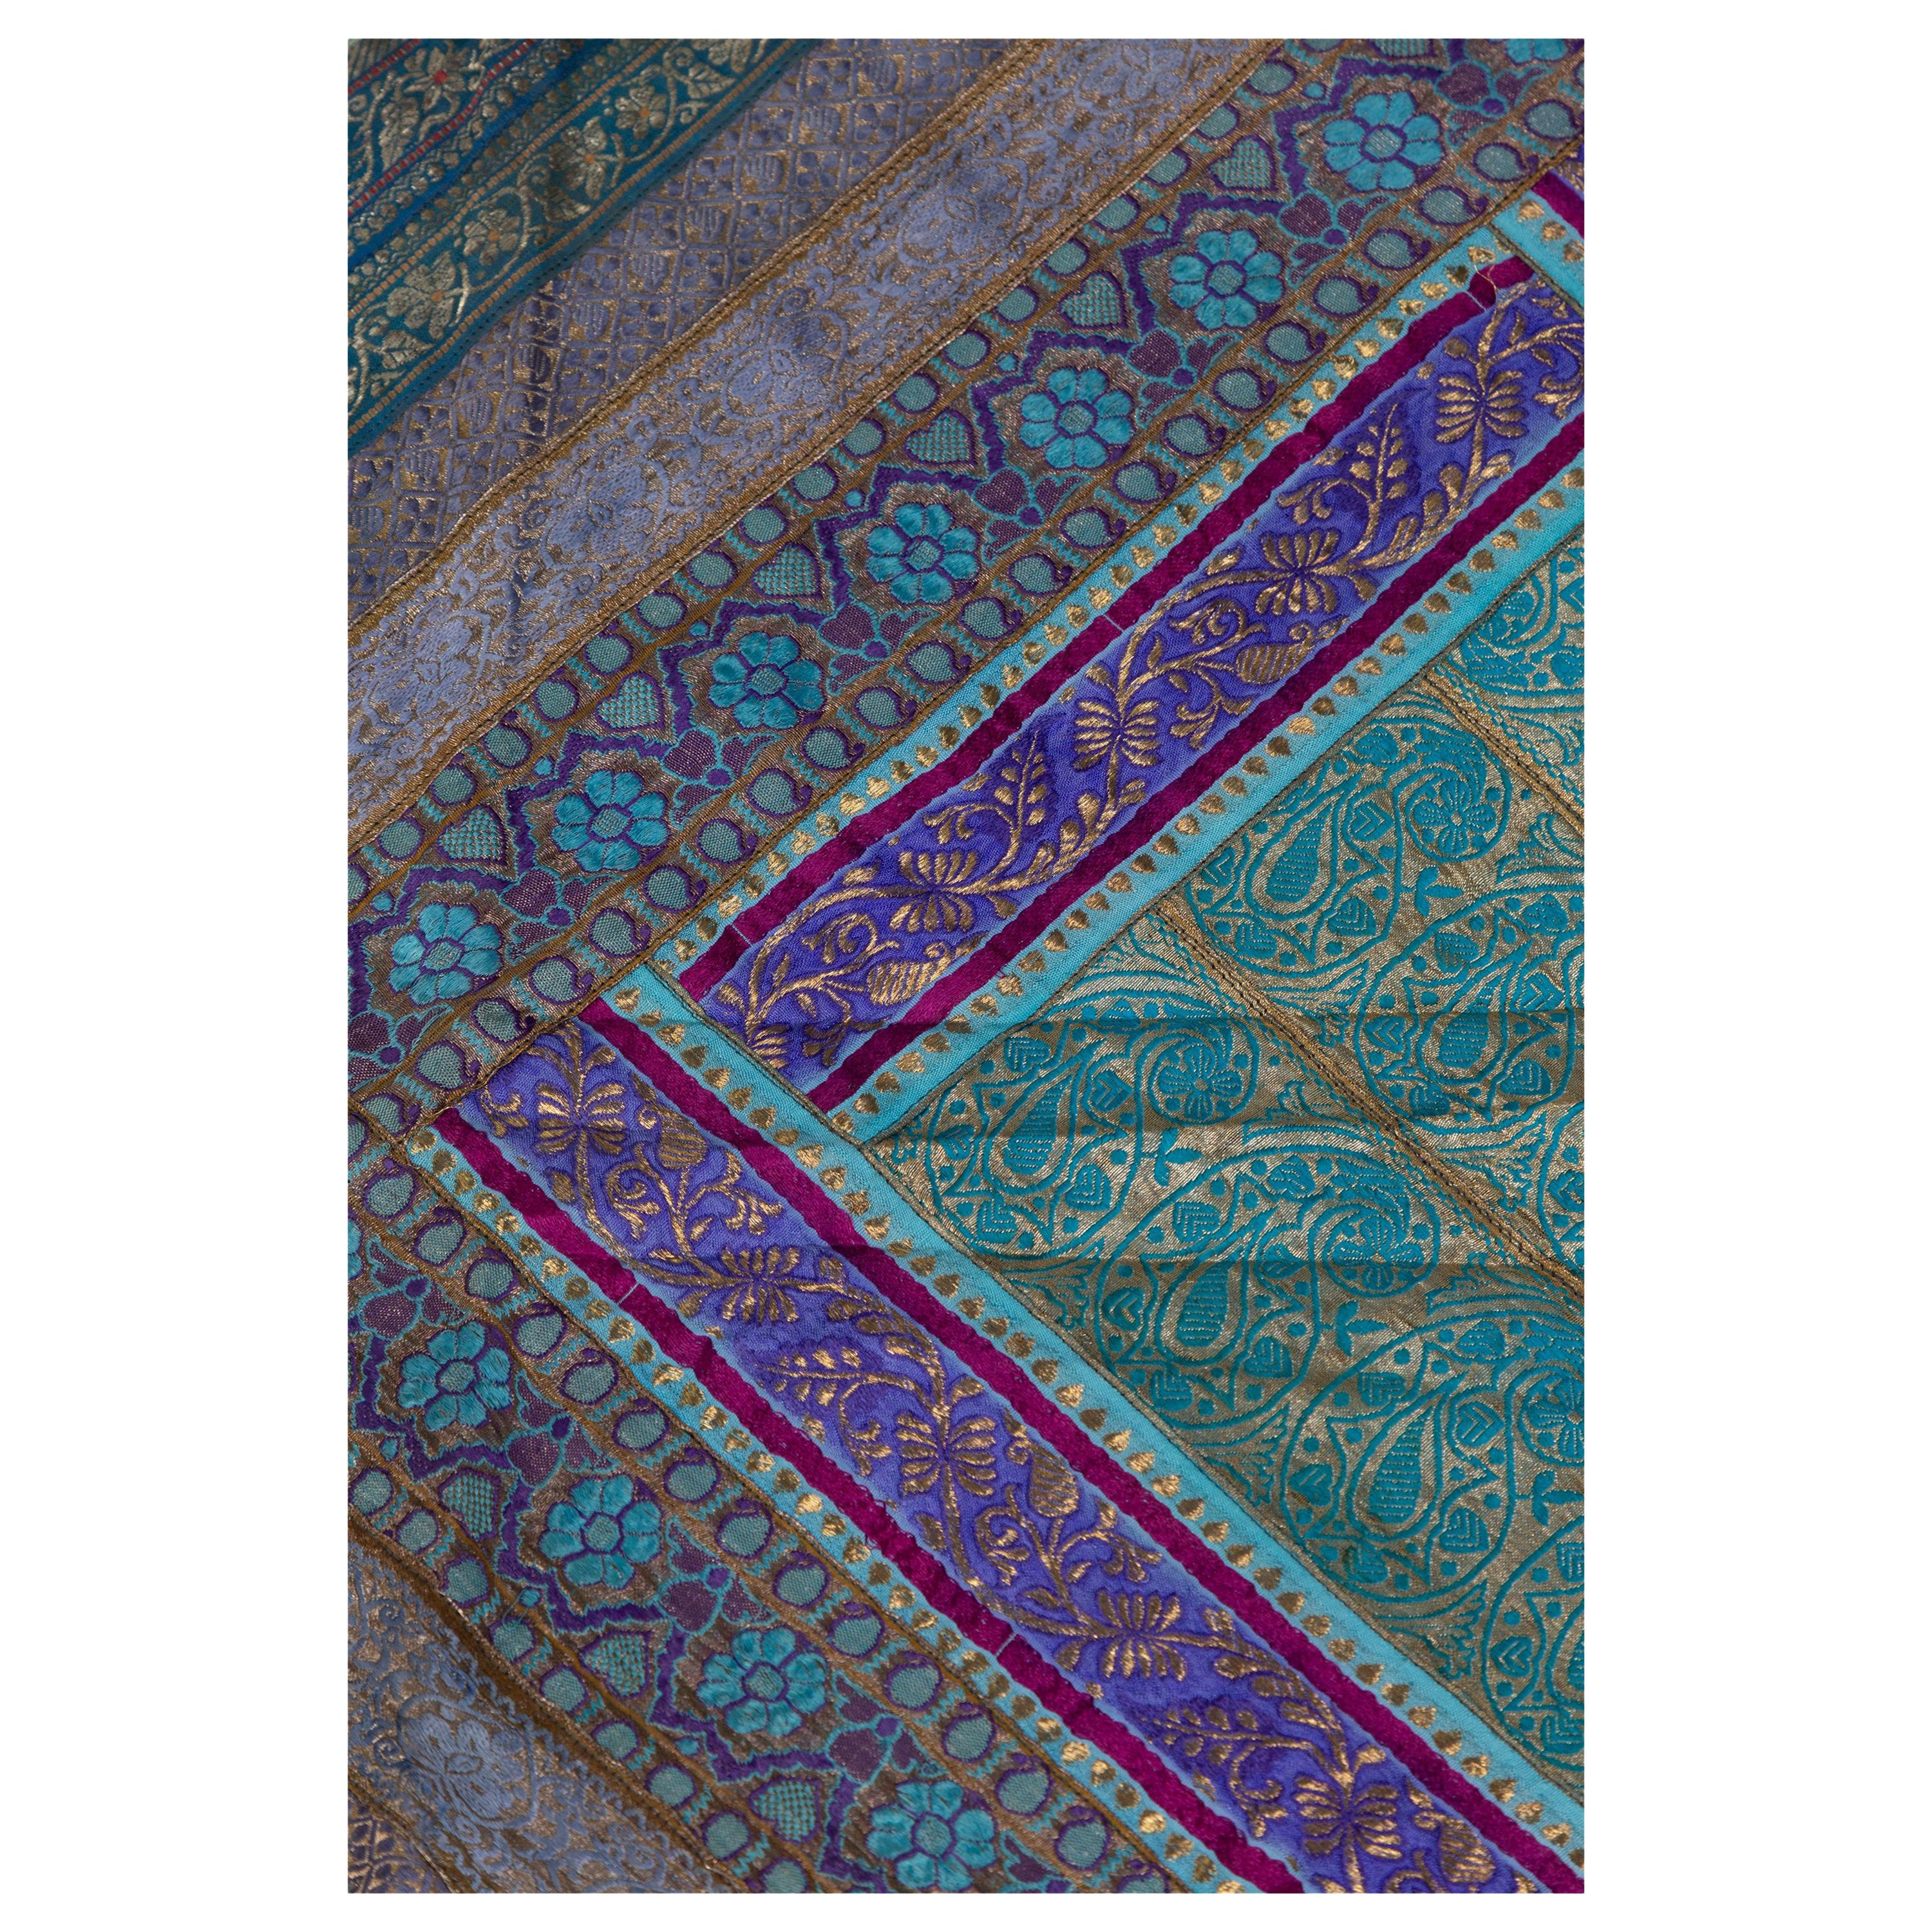 Vintage Indian Silk Embroidered Fabric with Turquoise, Violet and Gold Tones